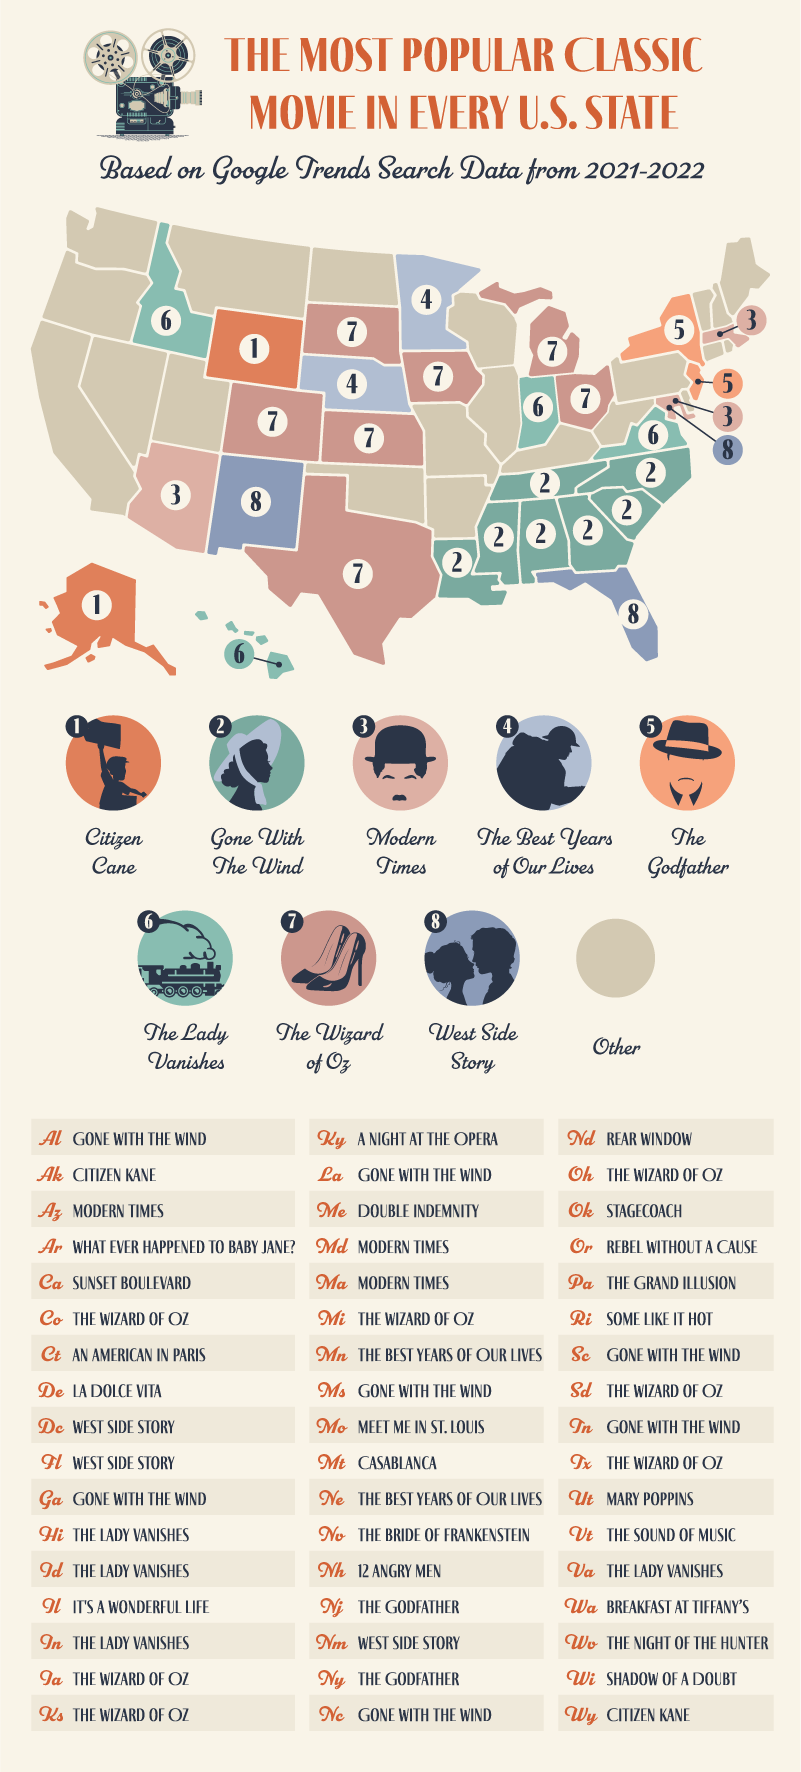 A map displaying each state’s most popular classic movie